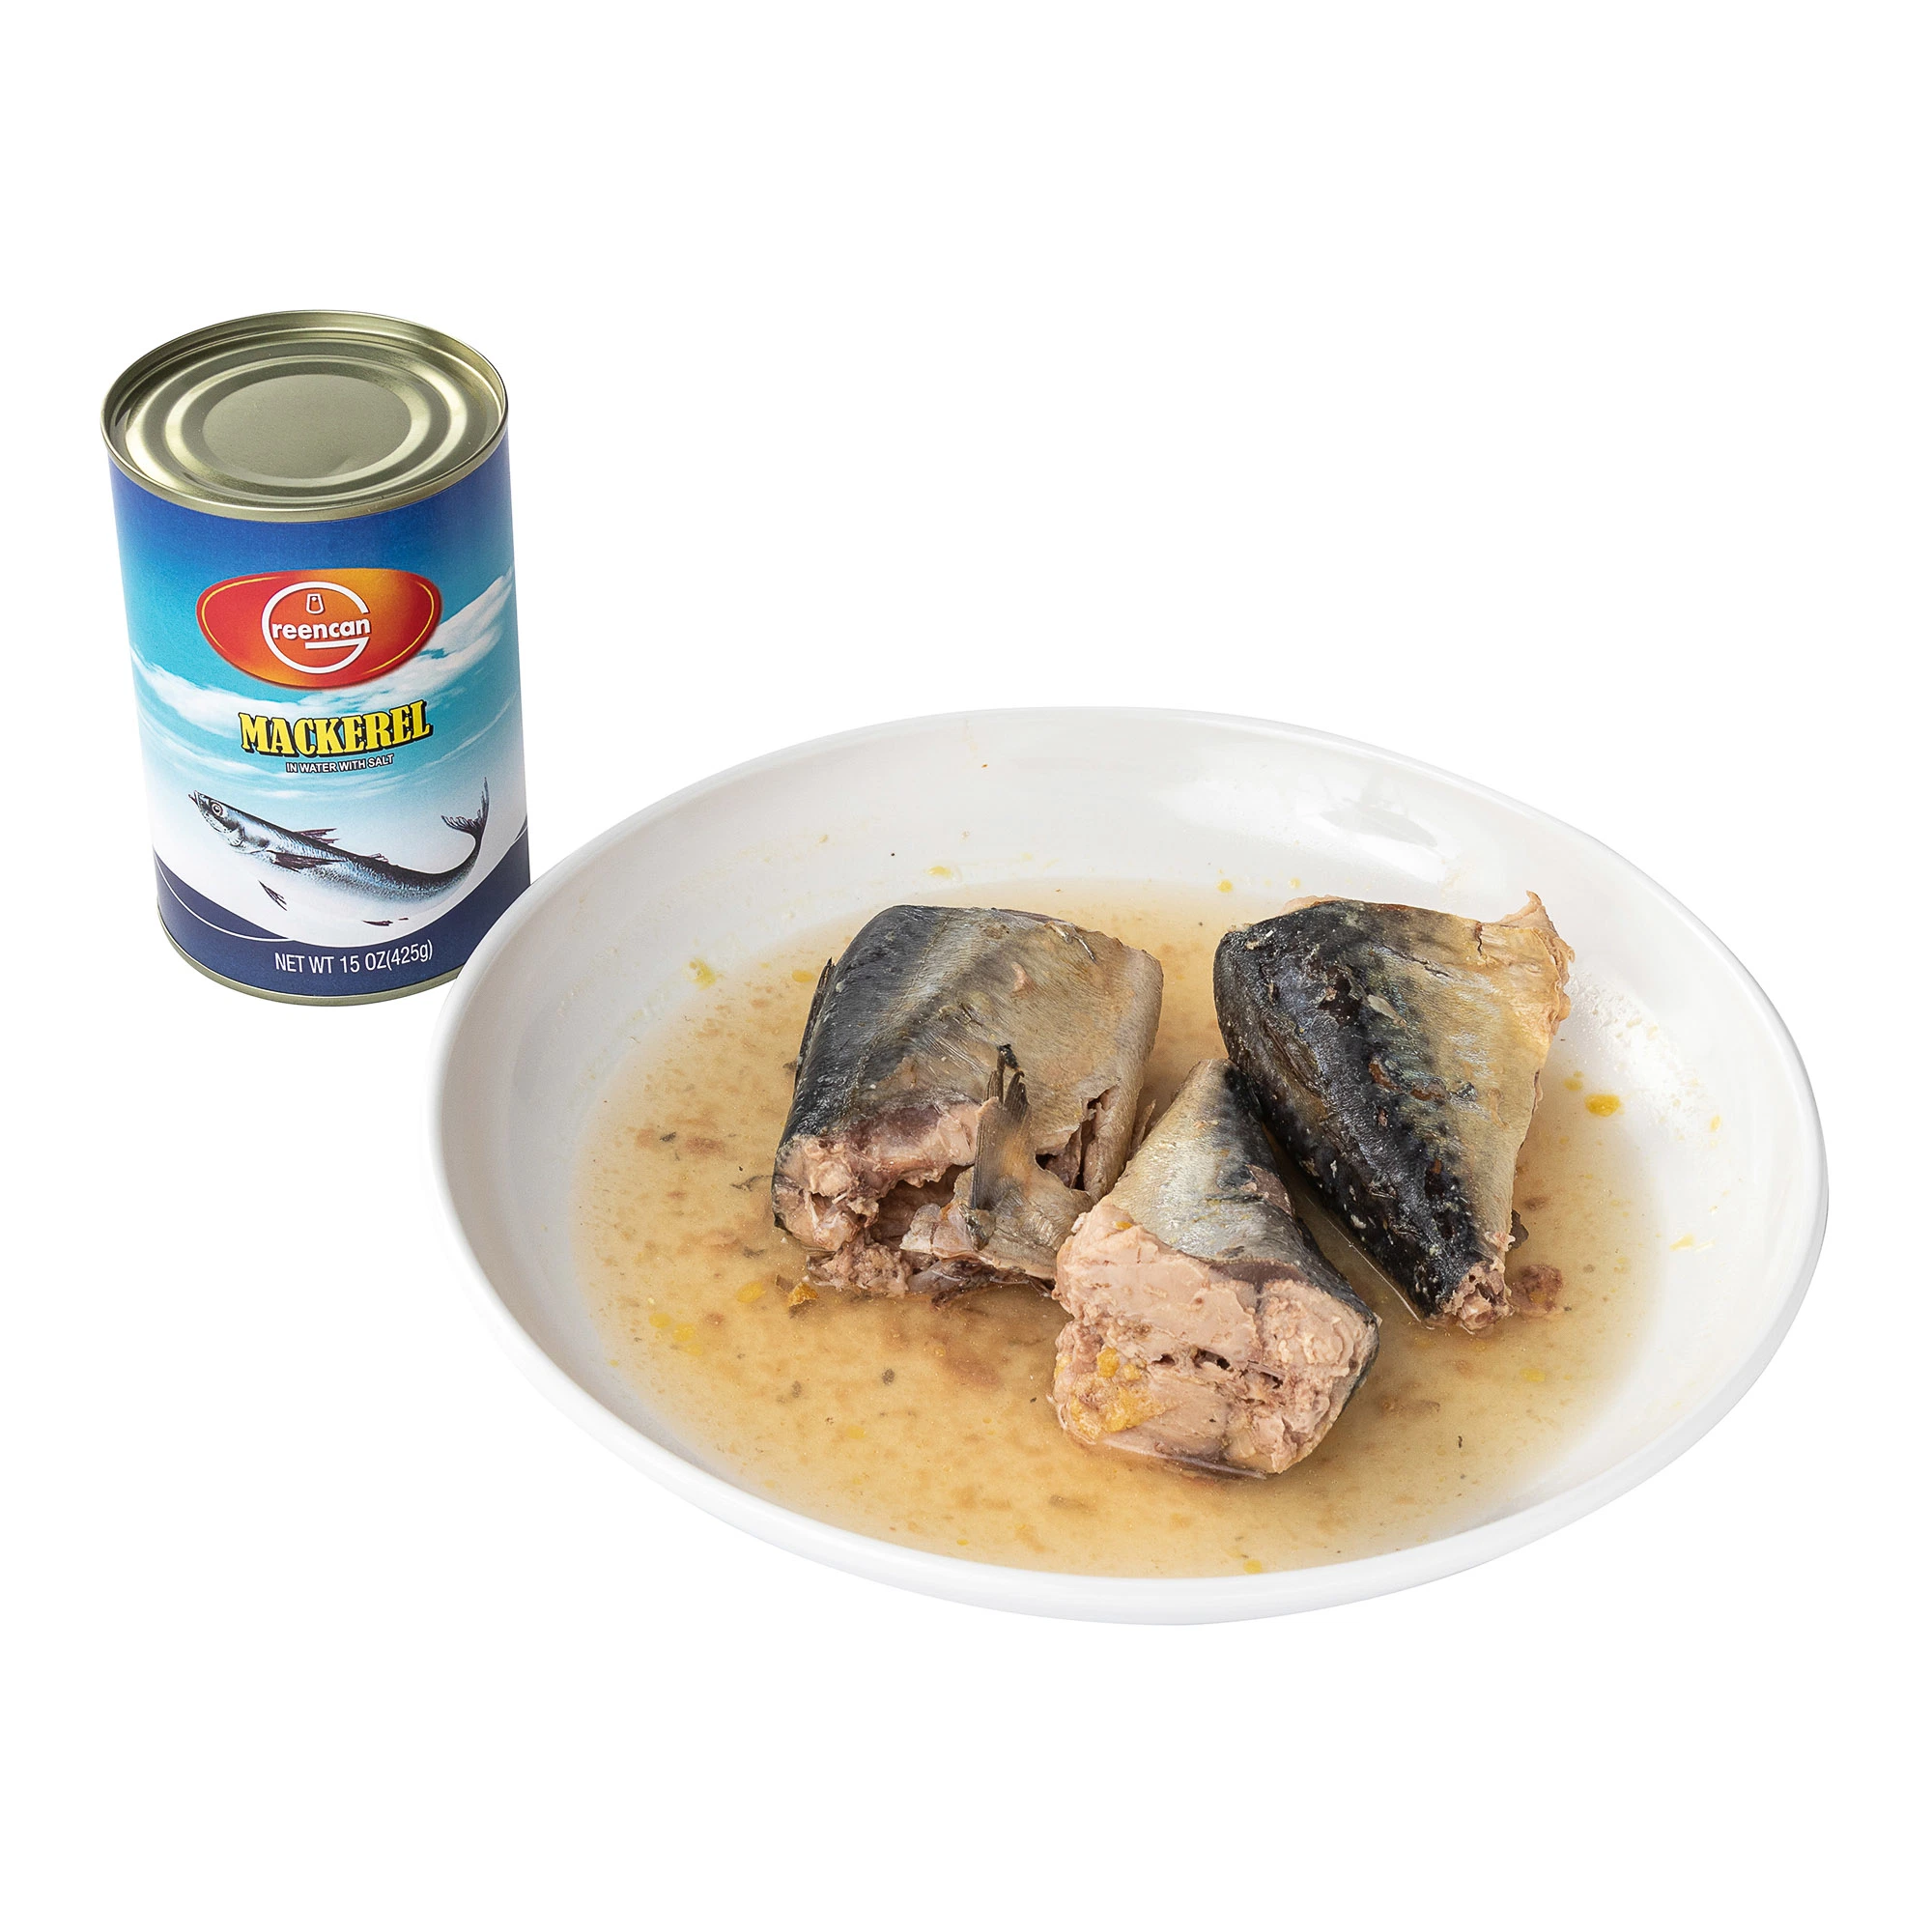 Health Seafood Canned Mackerel Fish in Brine with OEM